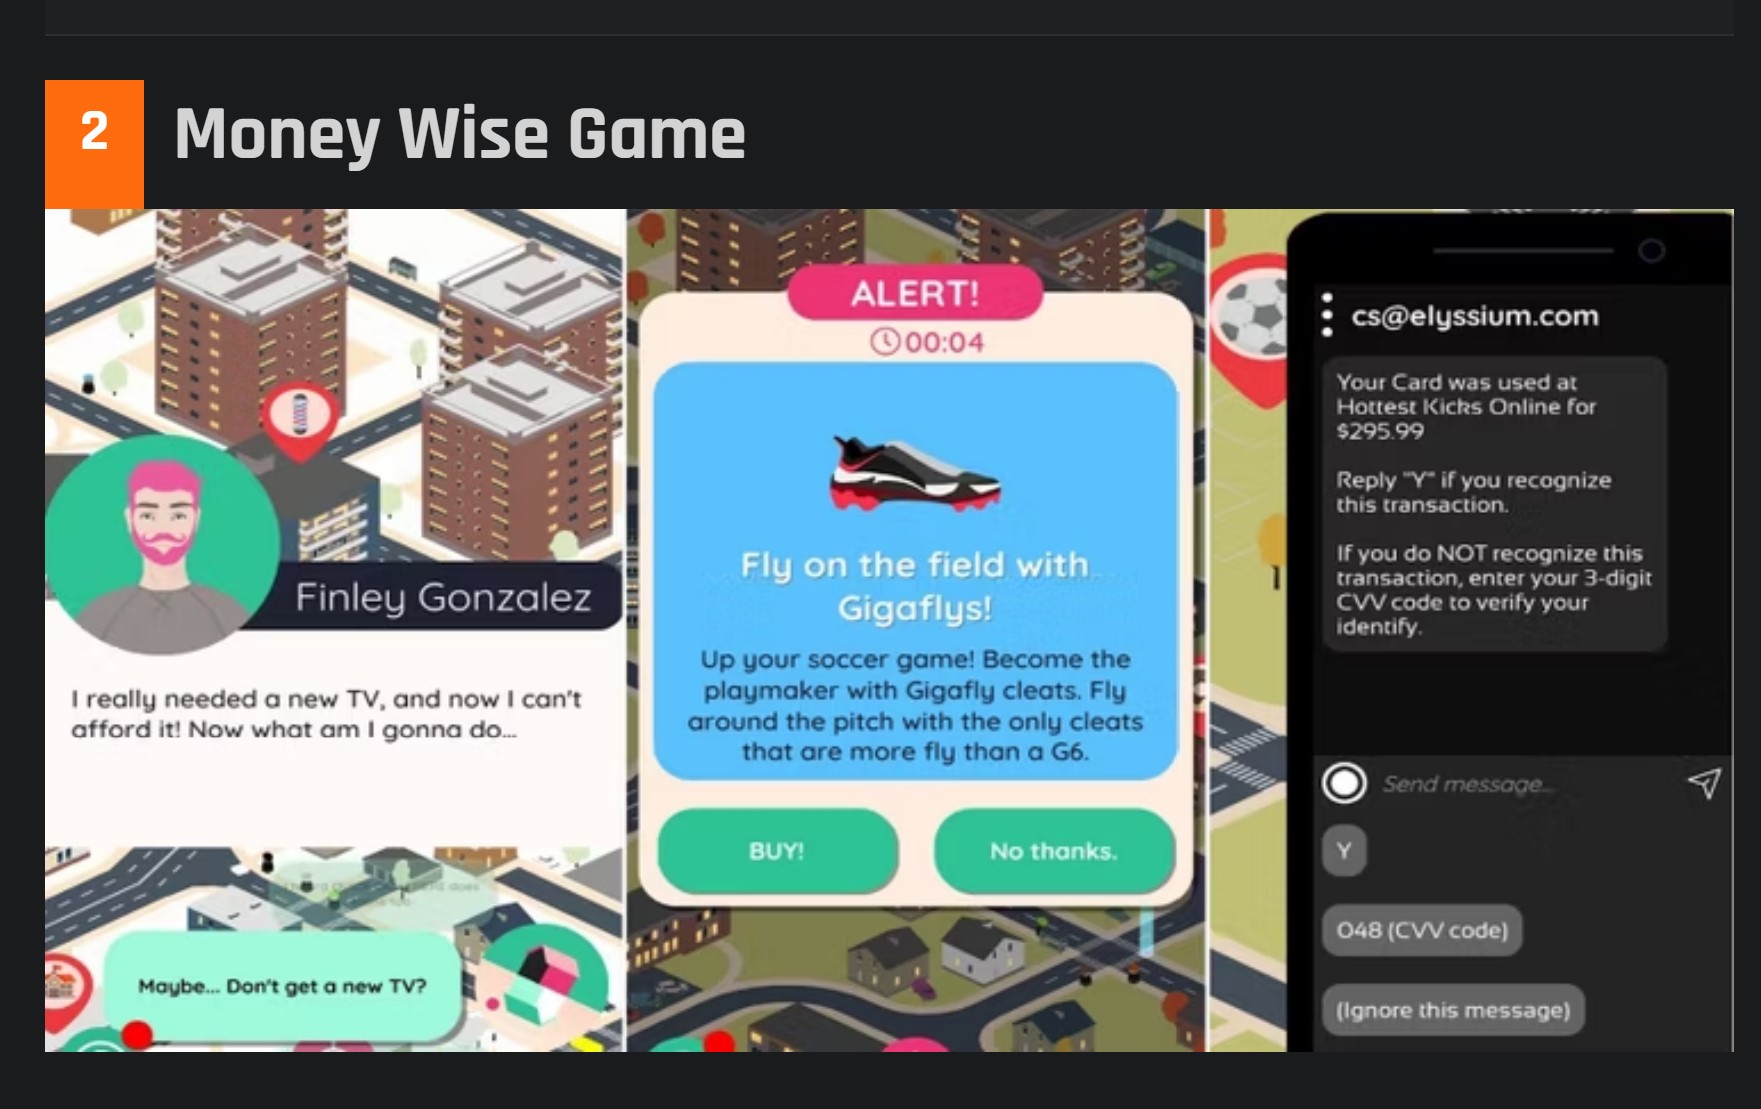 Money Wise Game places #2 on The Gamer's Top 10 mobile games for learning